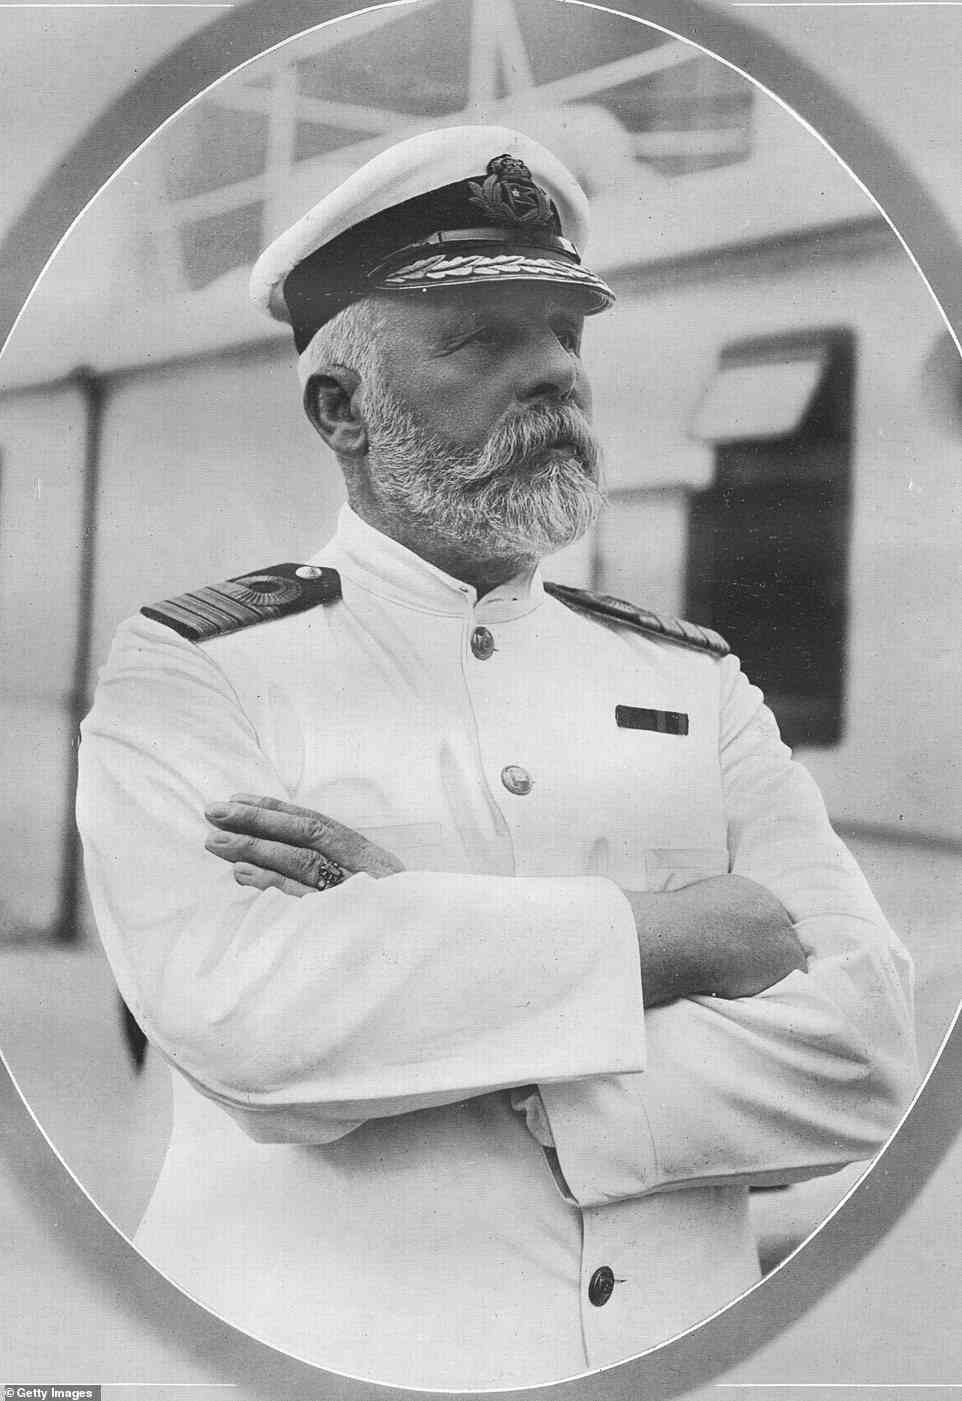 Captain Edward Smith (pictured) powered RMS Titanic through the Atlantic even though there had been ice warnings from neighbouring ships. Smith went down with the ship and perished at the age of 62